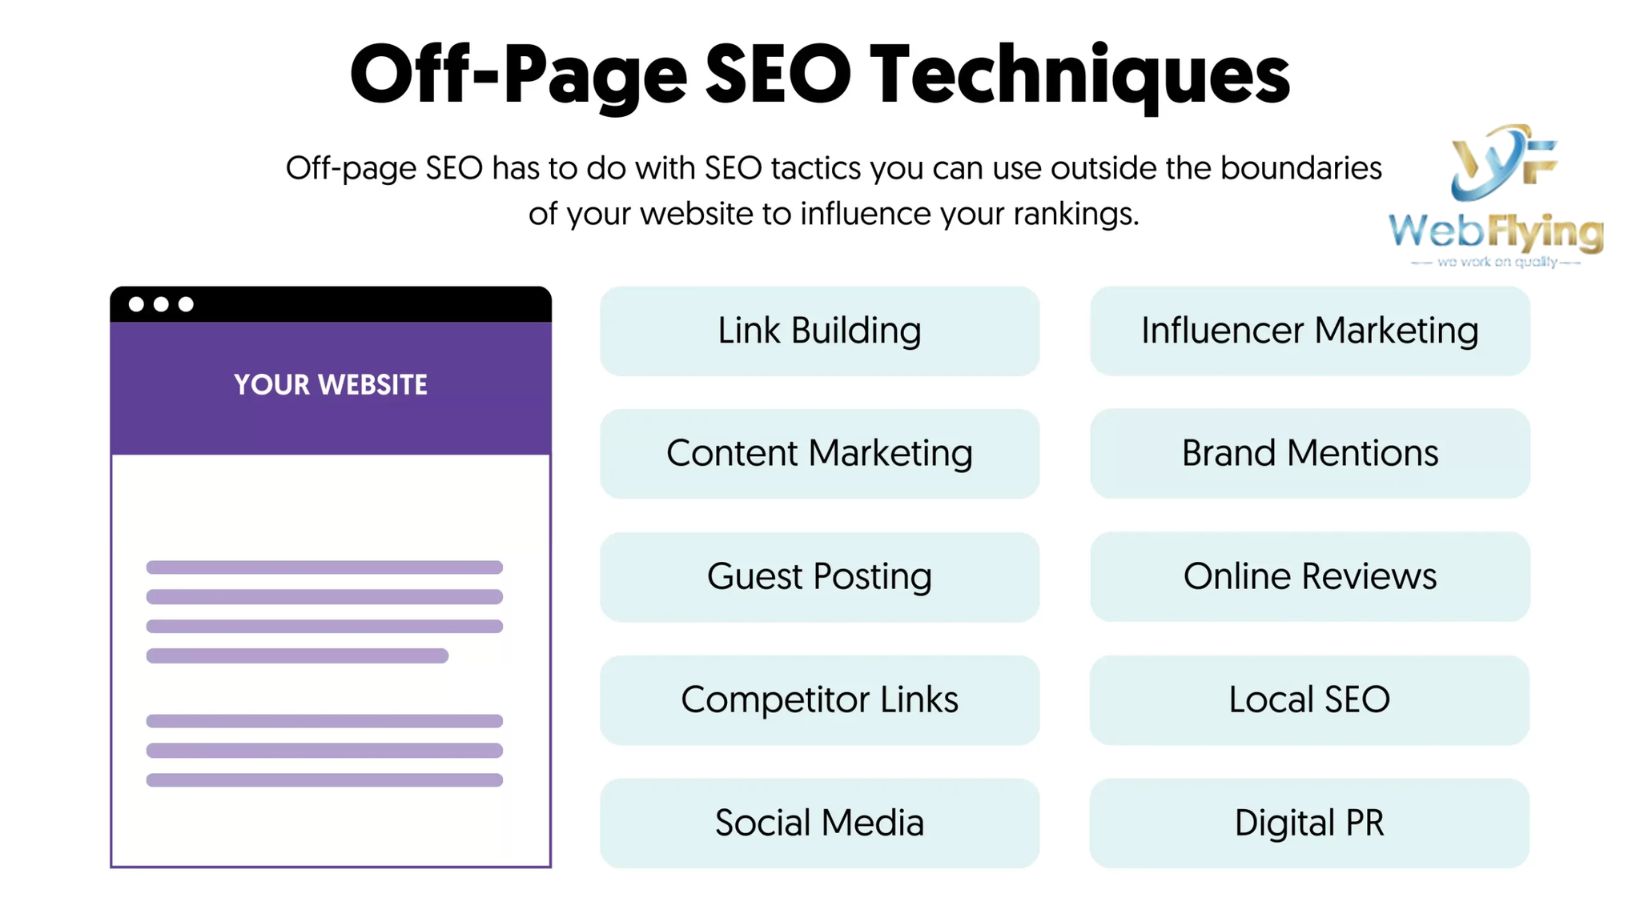 How to Create an Effective Off-Page SEO Strategy